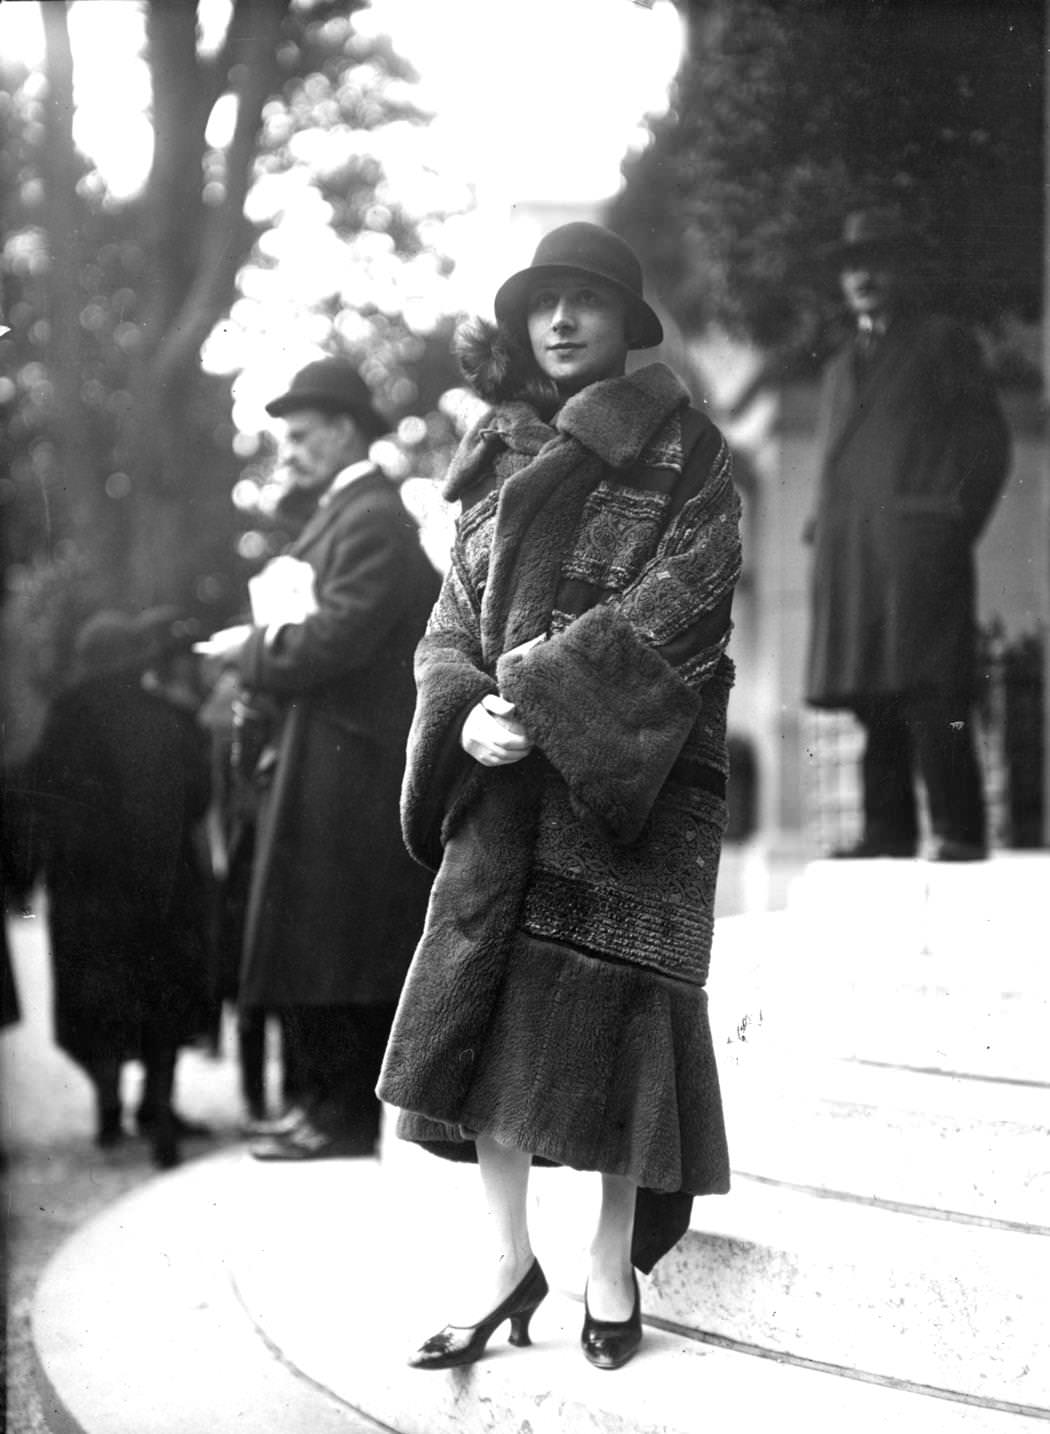 A brocade coat trimmed with lamb designed by Drecoll, worn with plain high-cut court shoes and a cloche hat with a brim, 1924